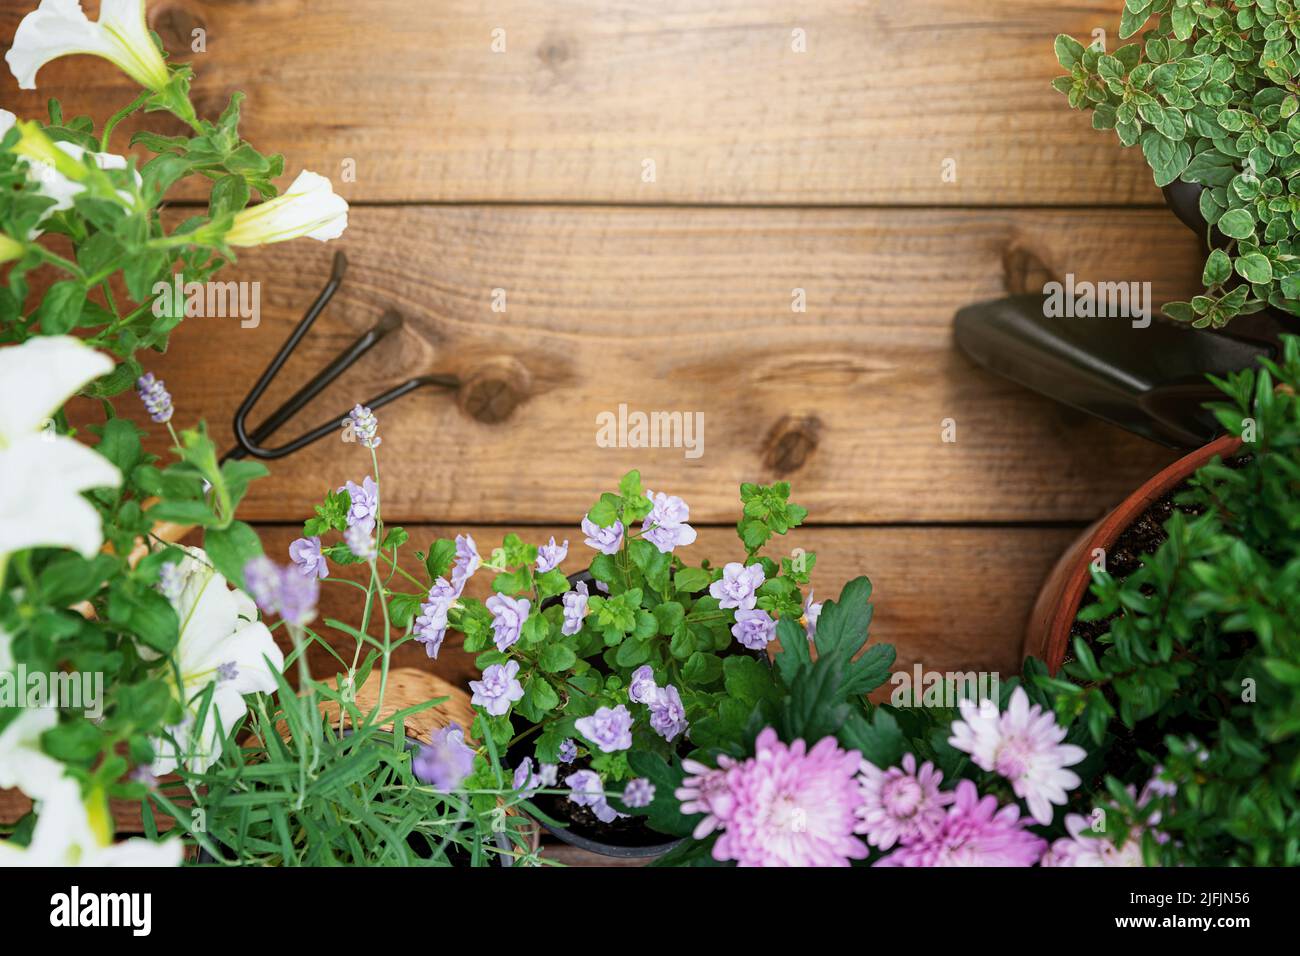 Top view on gardening, landscaping tools and equipment, different flowers and various herbs in pots on brown wood background flat lay. Empty blank copy space for text. Gardener work in garden concept Stock Photo